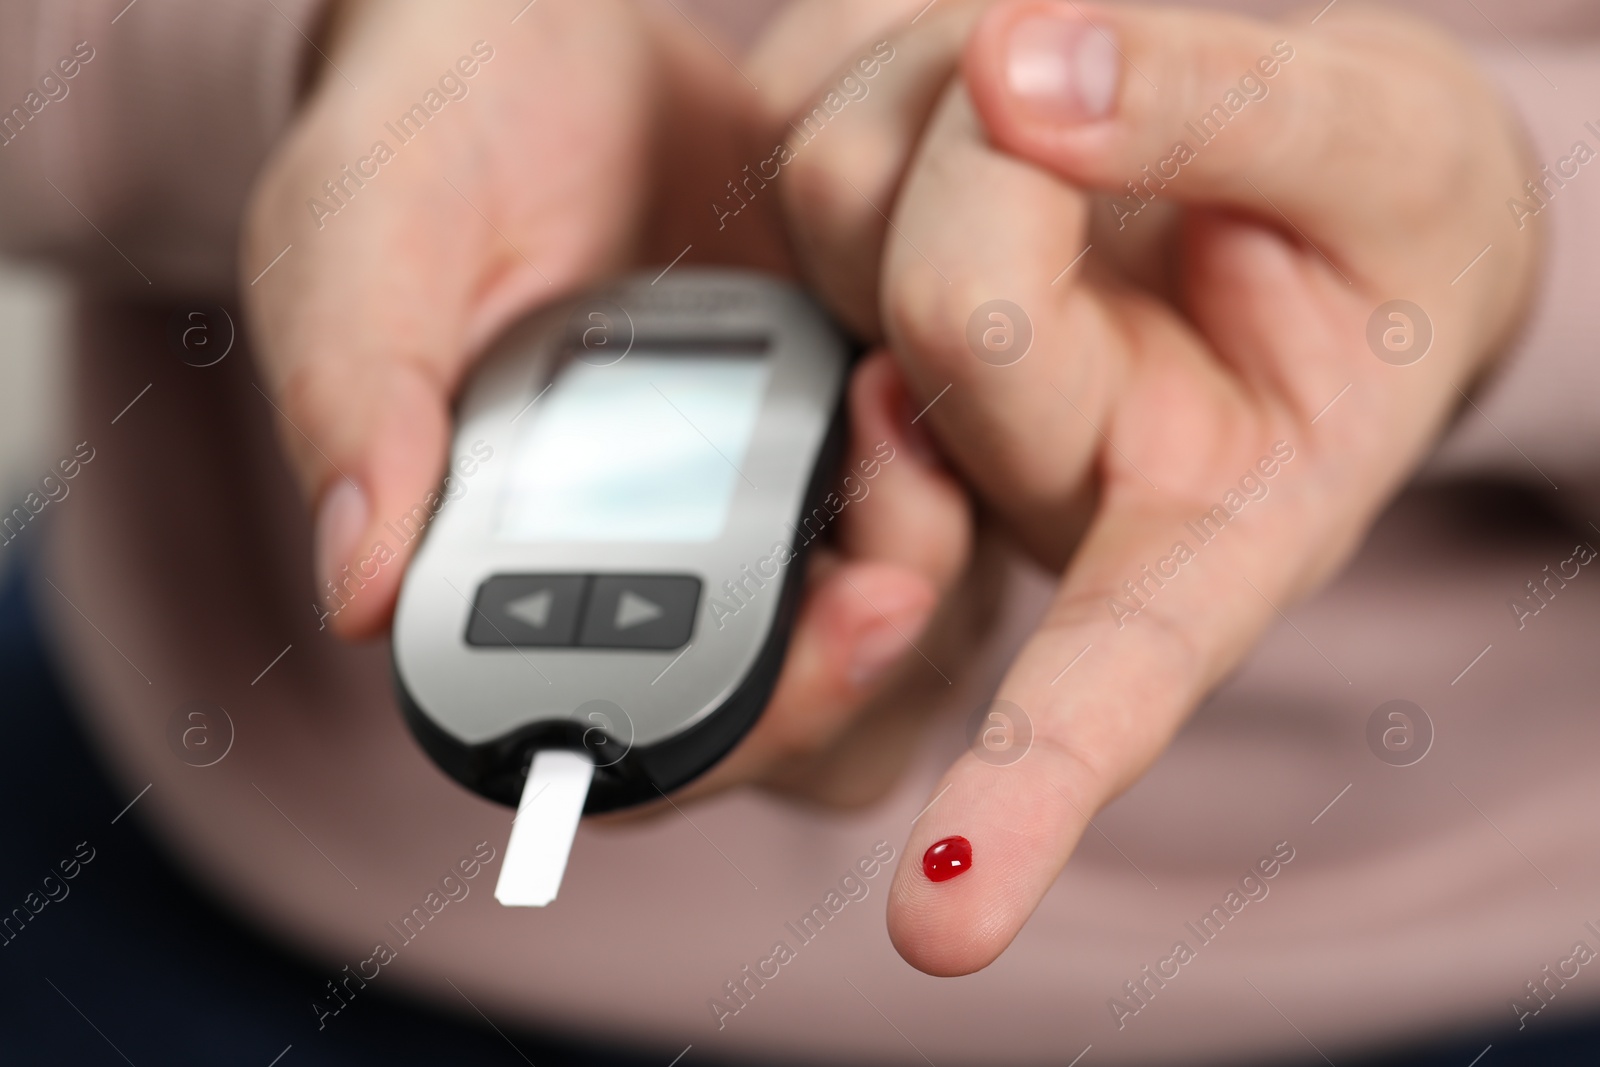 Photo of Diabetes test. Man checking blood sugar level with glucometer, closeup